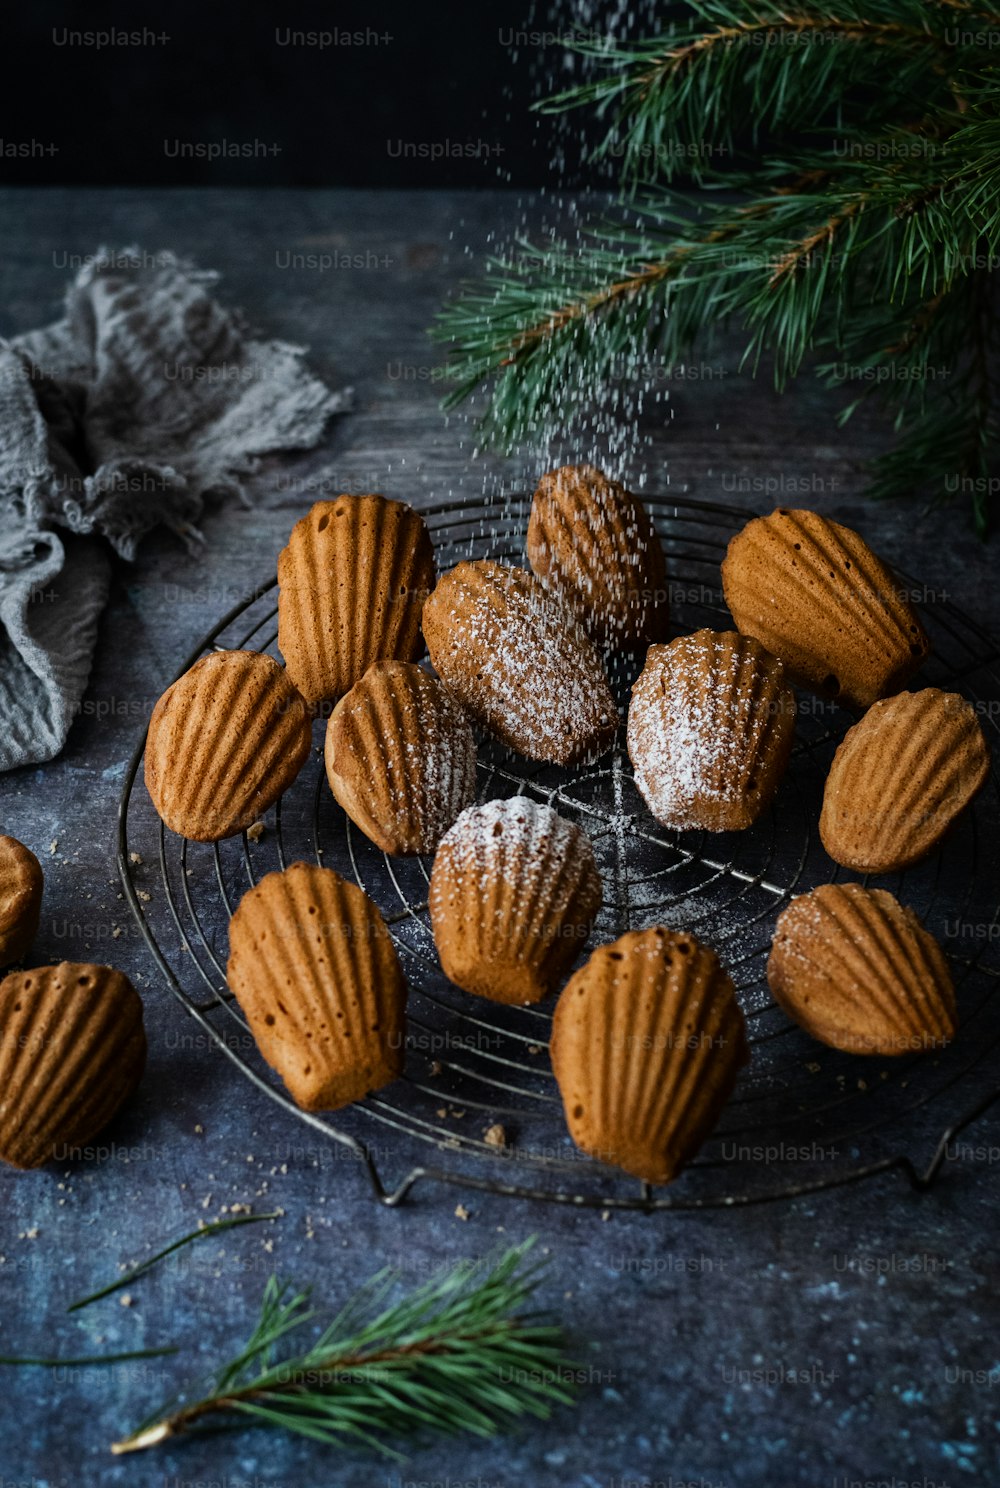 a group of pine cones on a grill